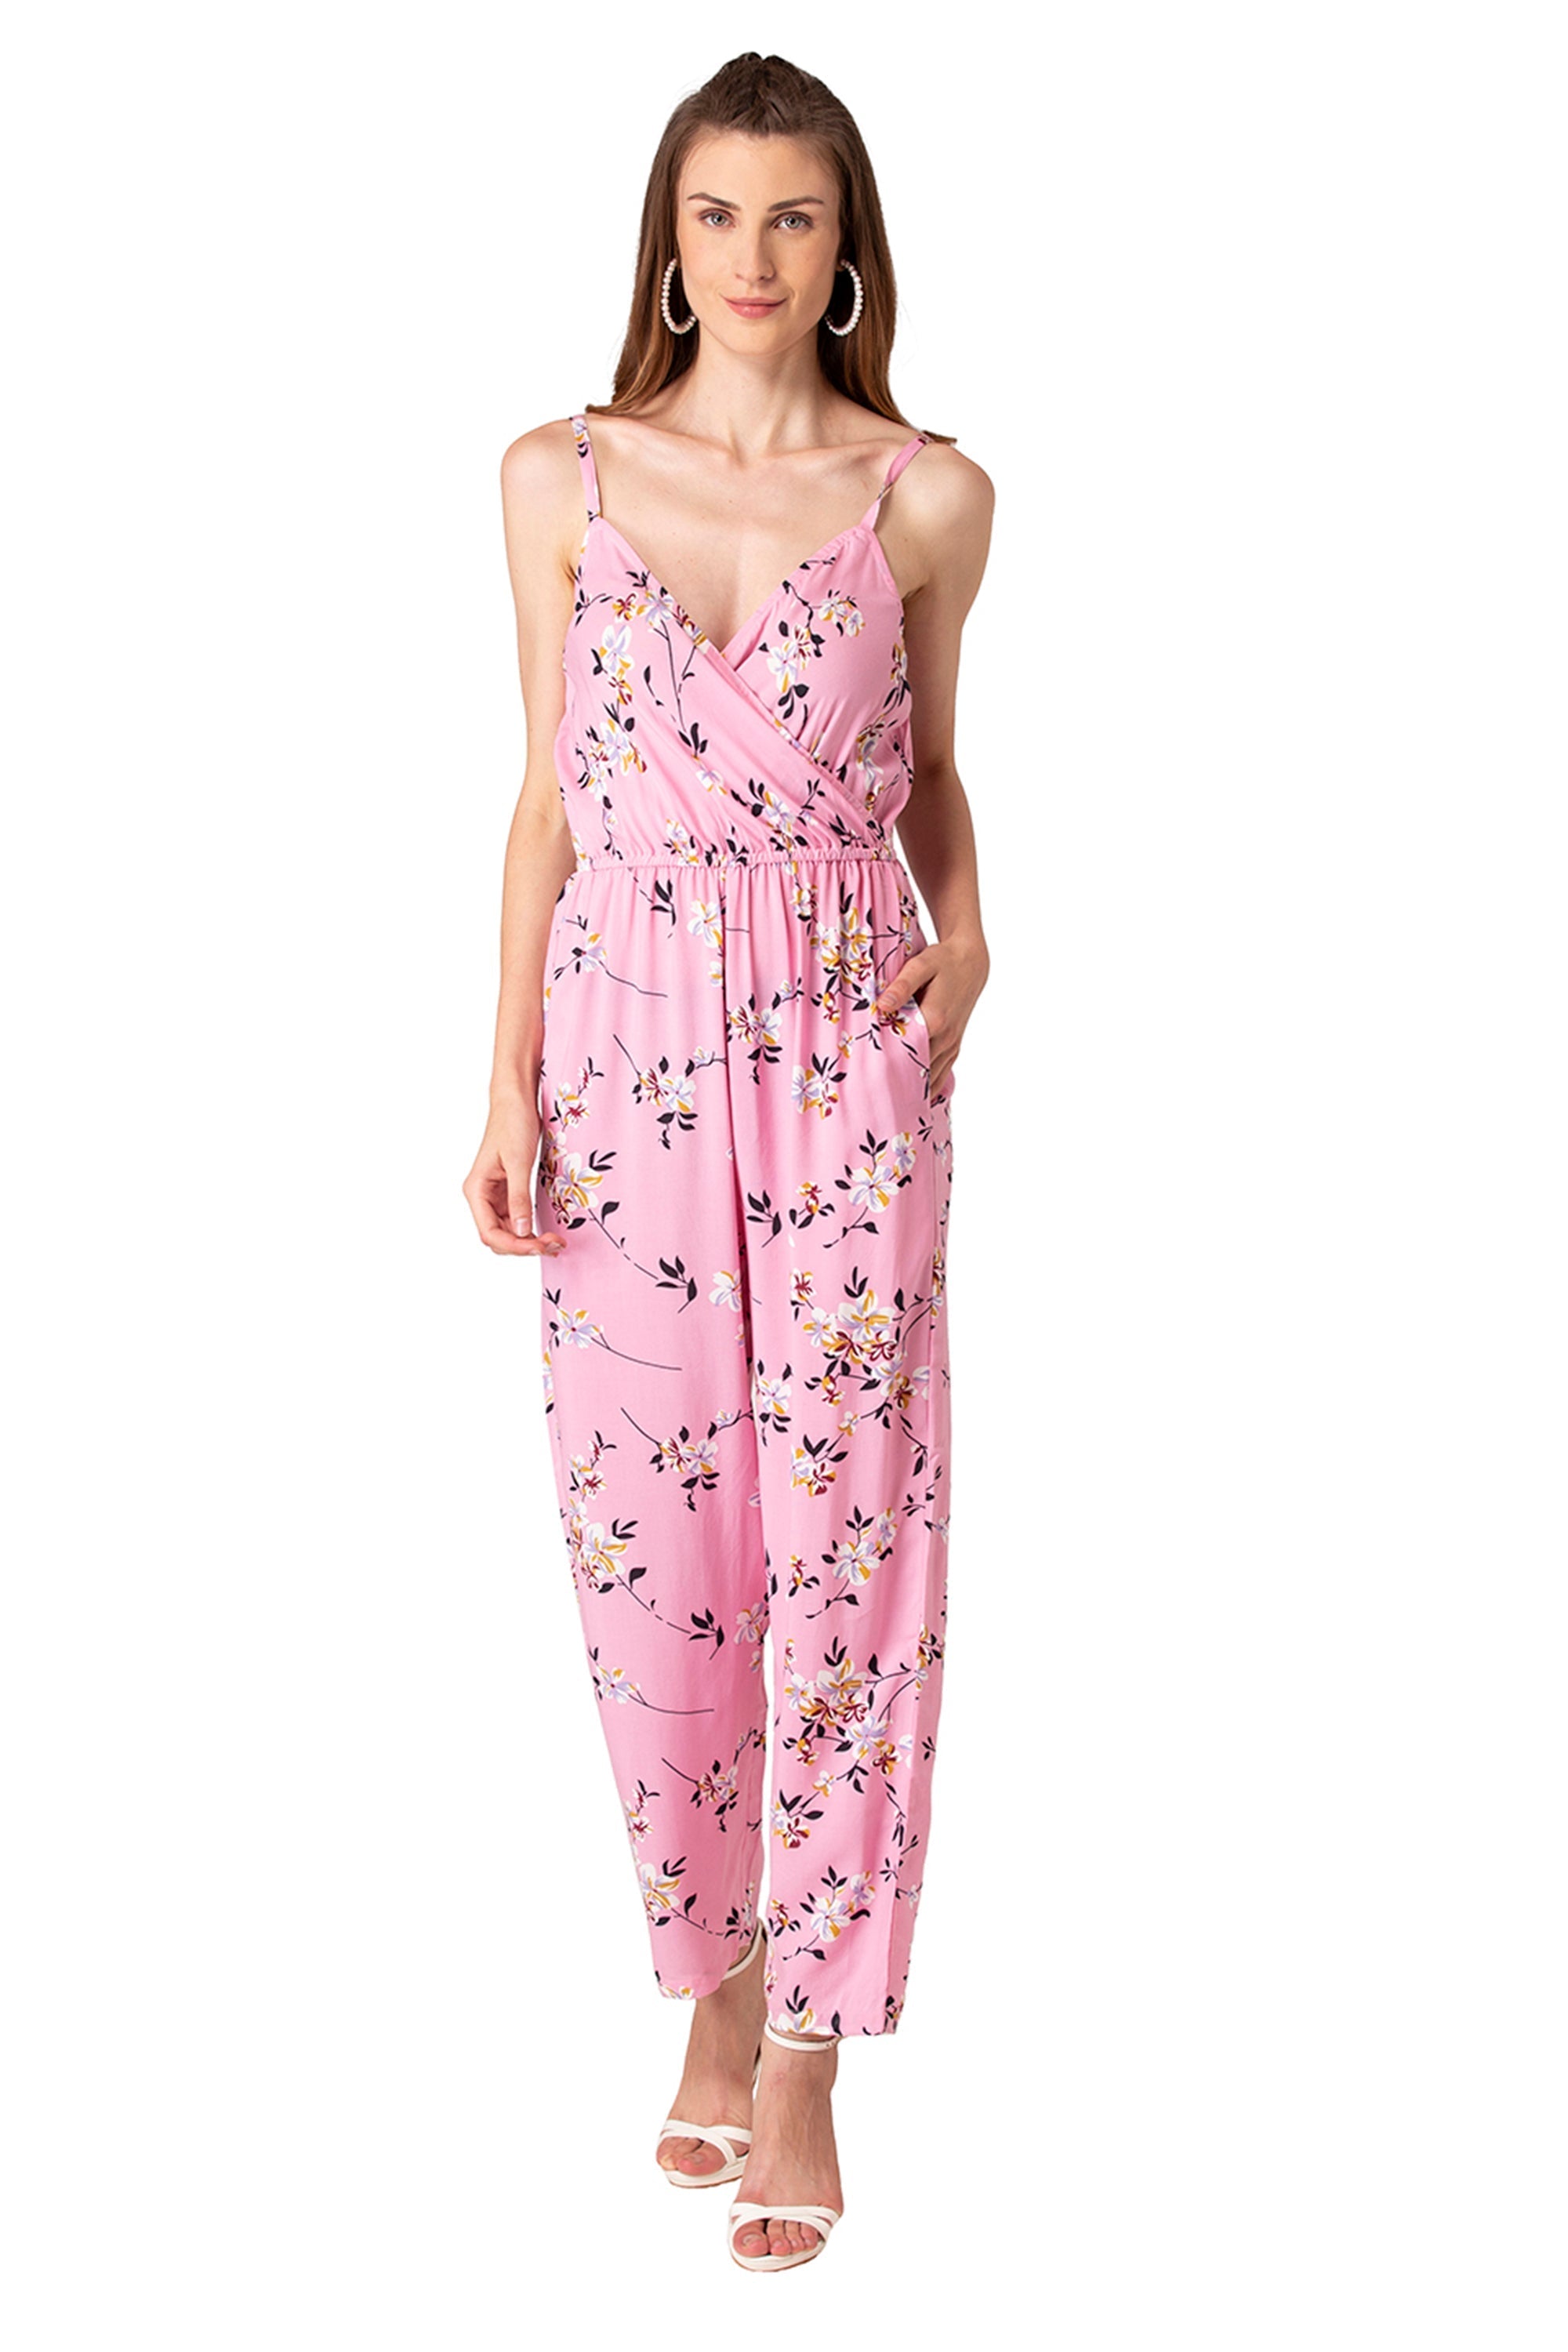 Harley Green Floral Jumpsuit - Women from Yumi UK